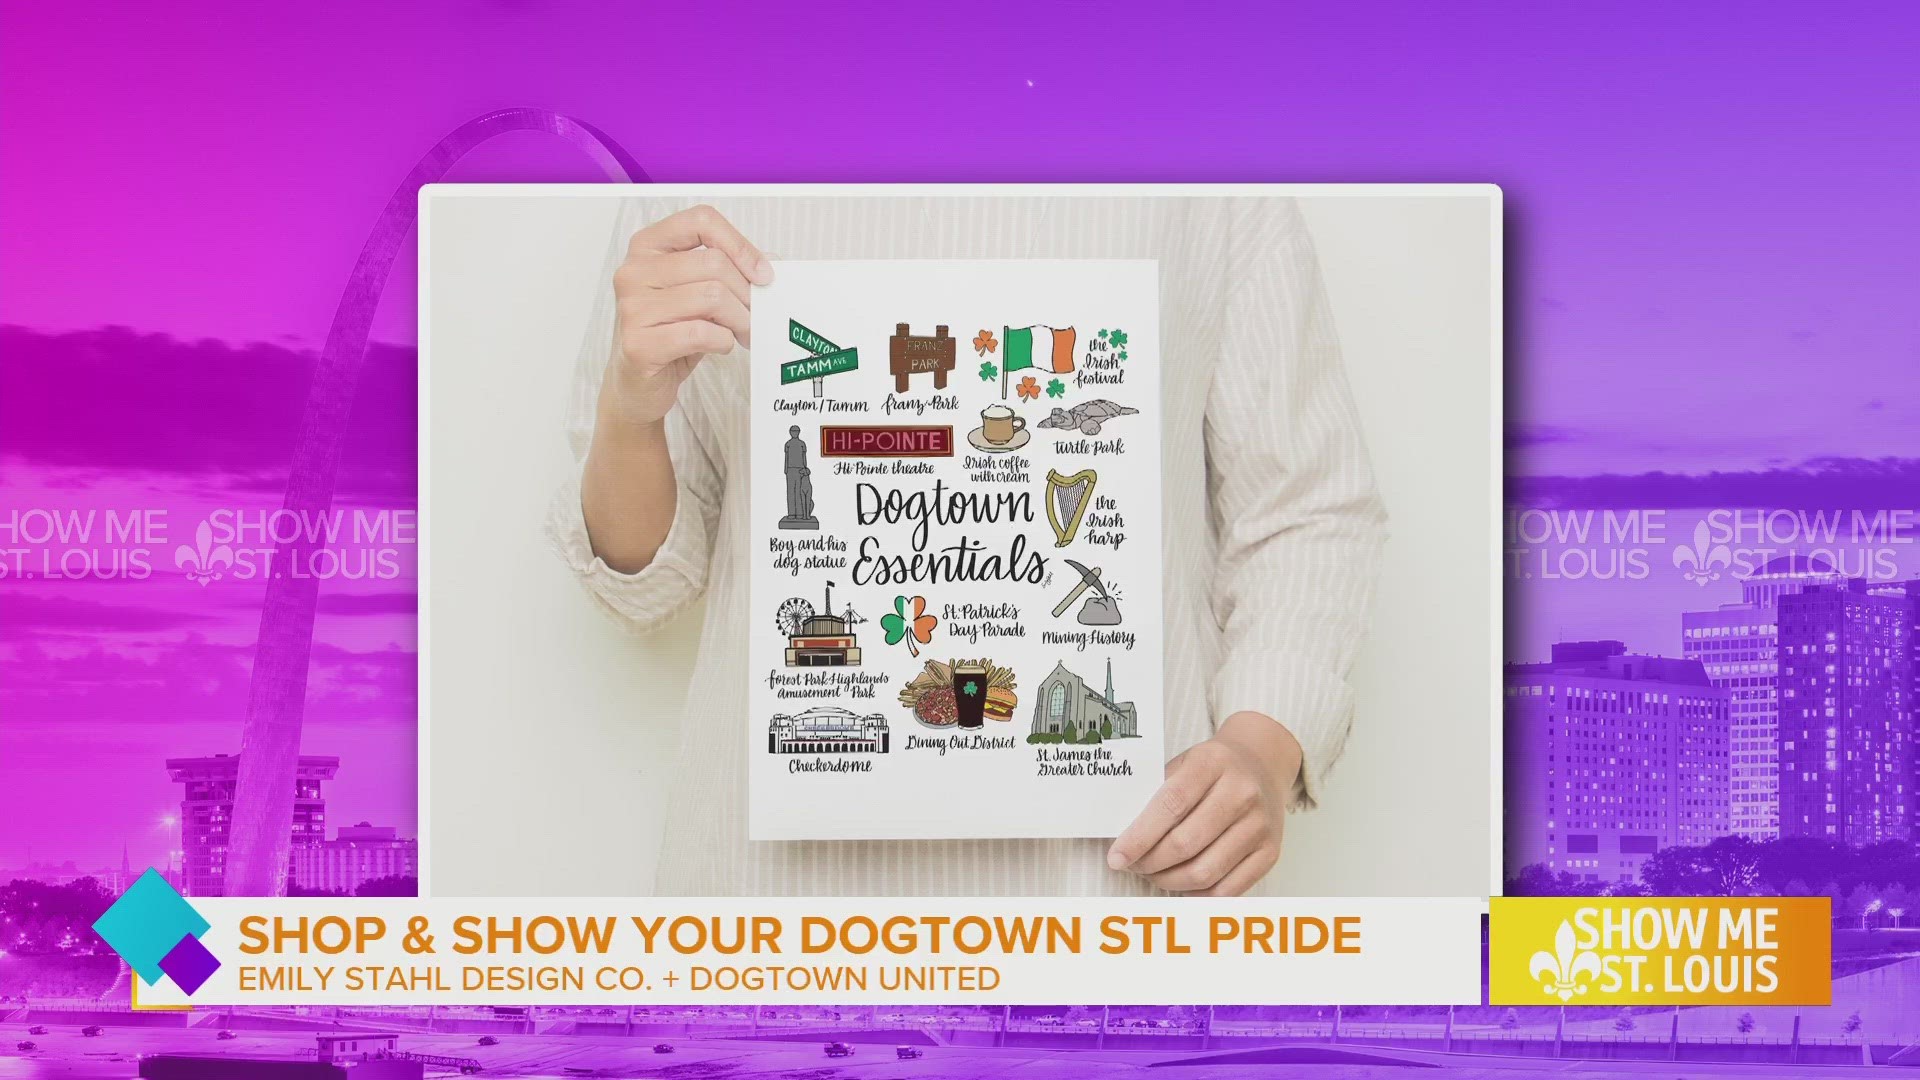 Shop Emily Stahl Design Co. and show your Dogtown and St. Louis pride!